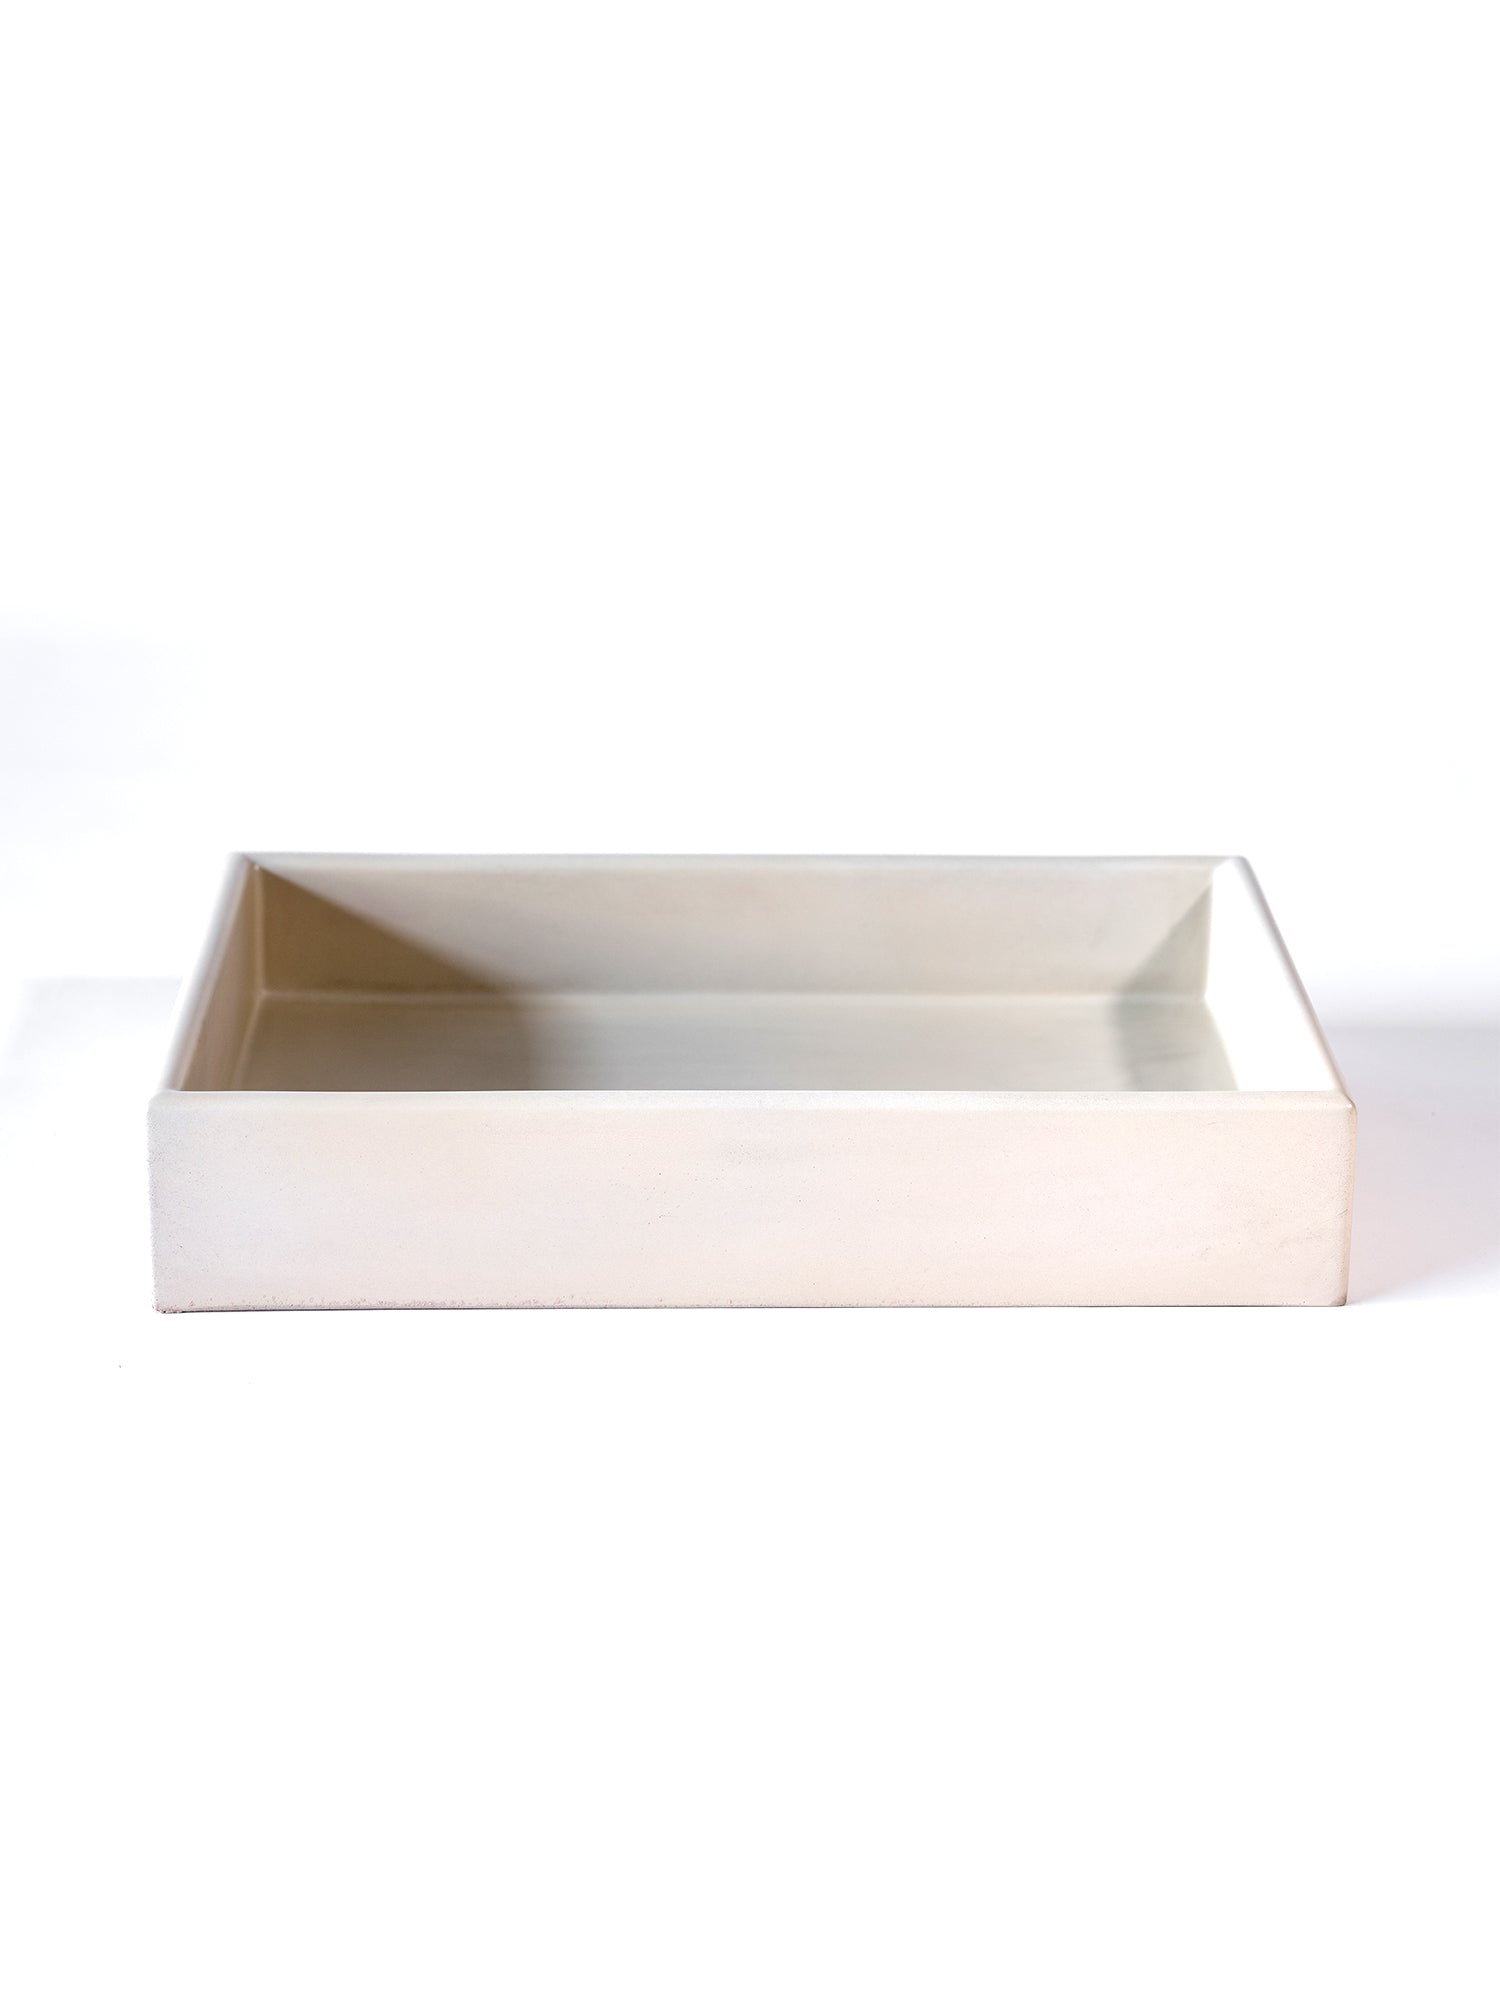 The Box Basin Vanity Set - Includes Stand (Price Upon Request)